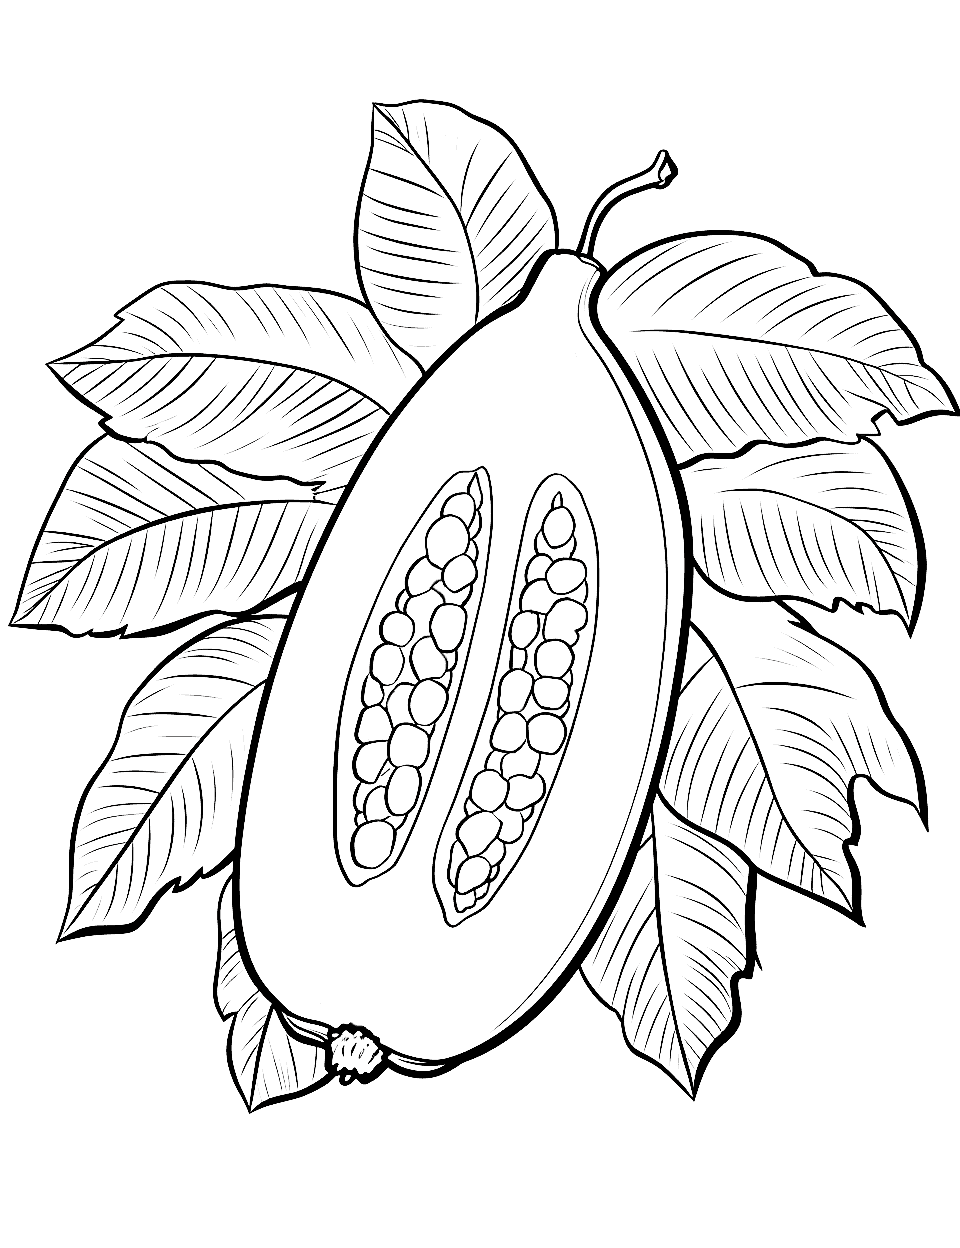 Papaya Party Fruit Coloring Page - A papaya cut in half, surrounded by tropical leaves.